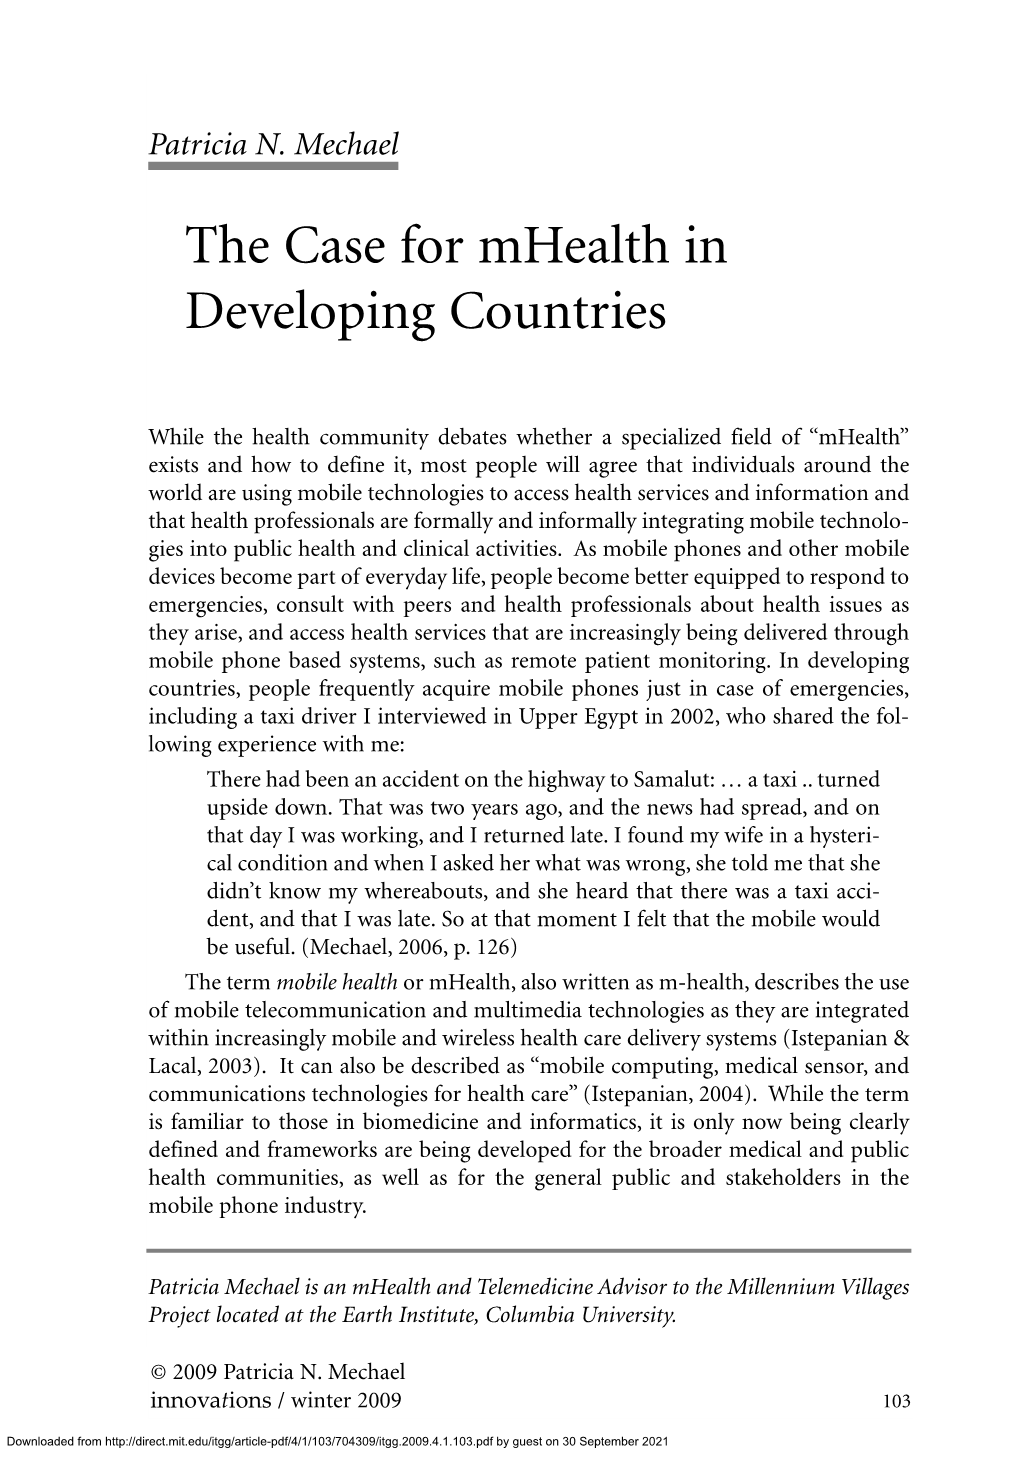 The Case for Mhealth in Developing Countries